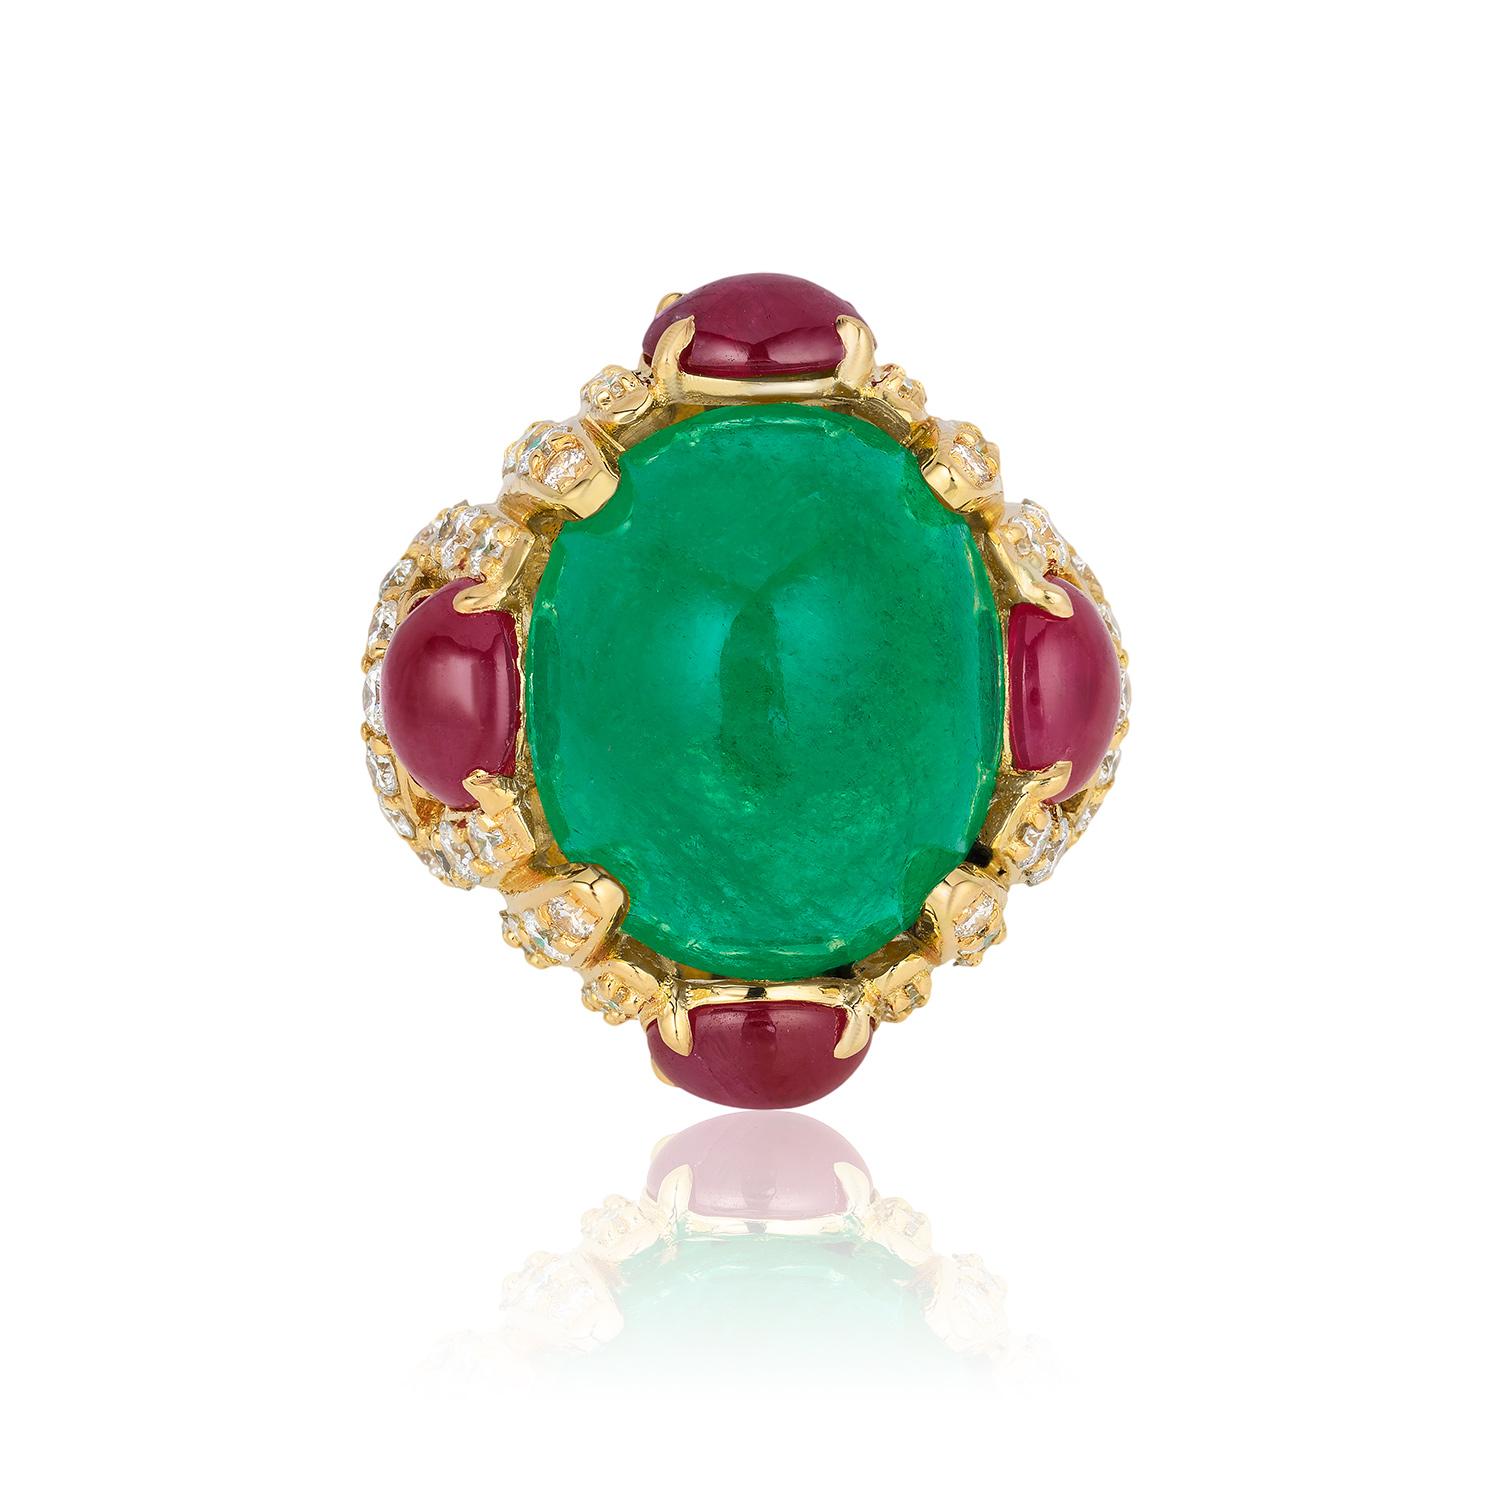 Contemporary Andreoli 14.53 Carat Colombian Emerald Ruby Diamond 18 Karat Yellow Gold Ring For Sale